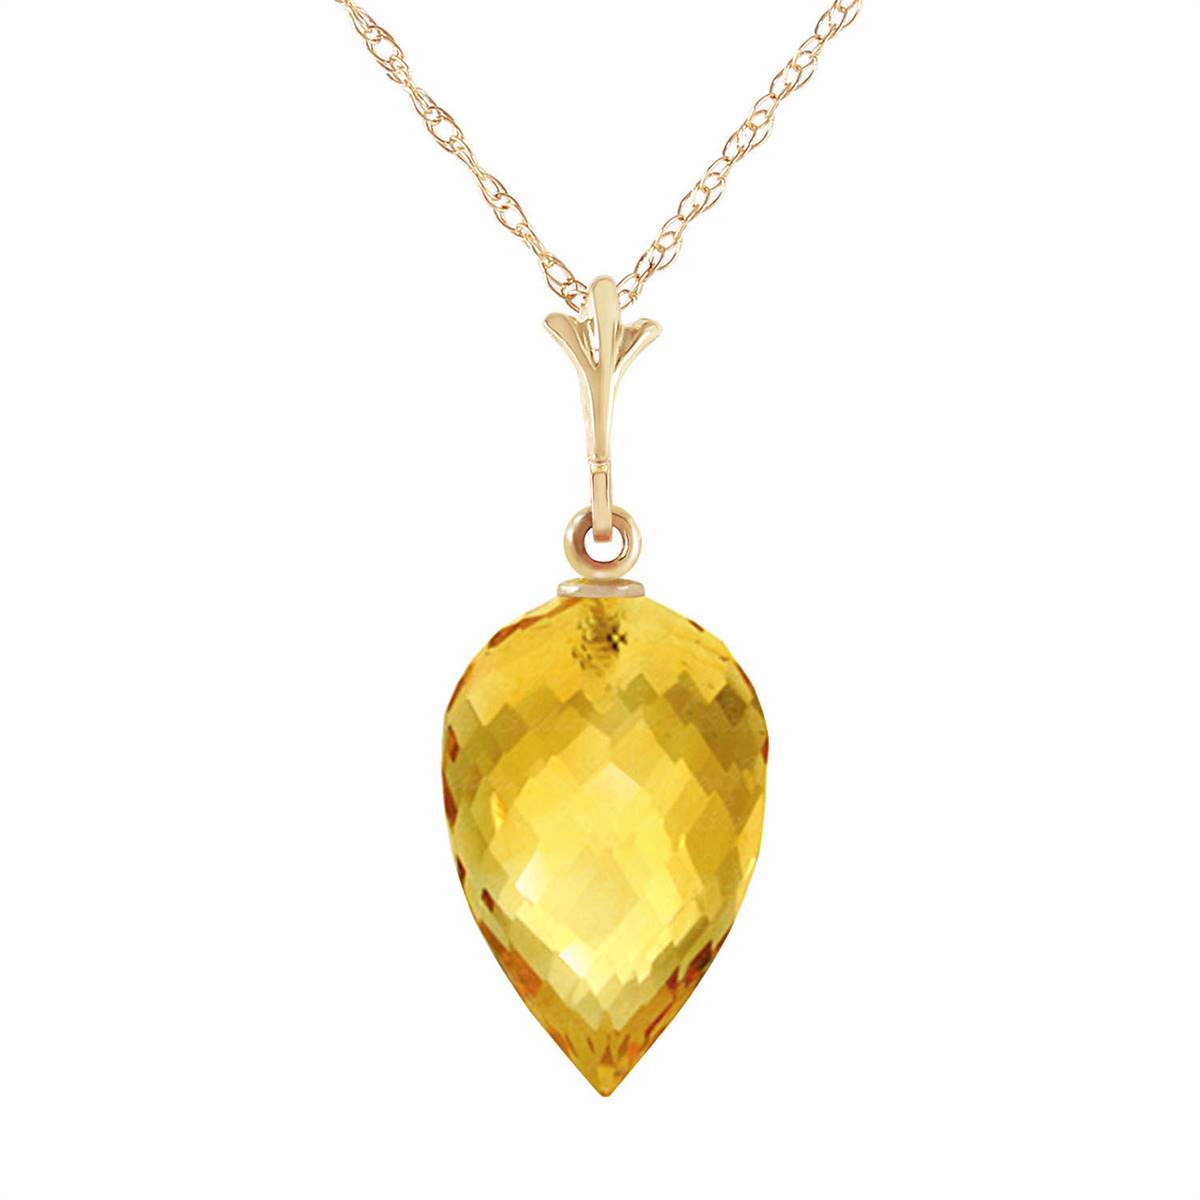 9.5 Carat 14K Solid Yellow Gold Necklace Pointy Briolette Drop Citrine